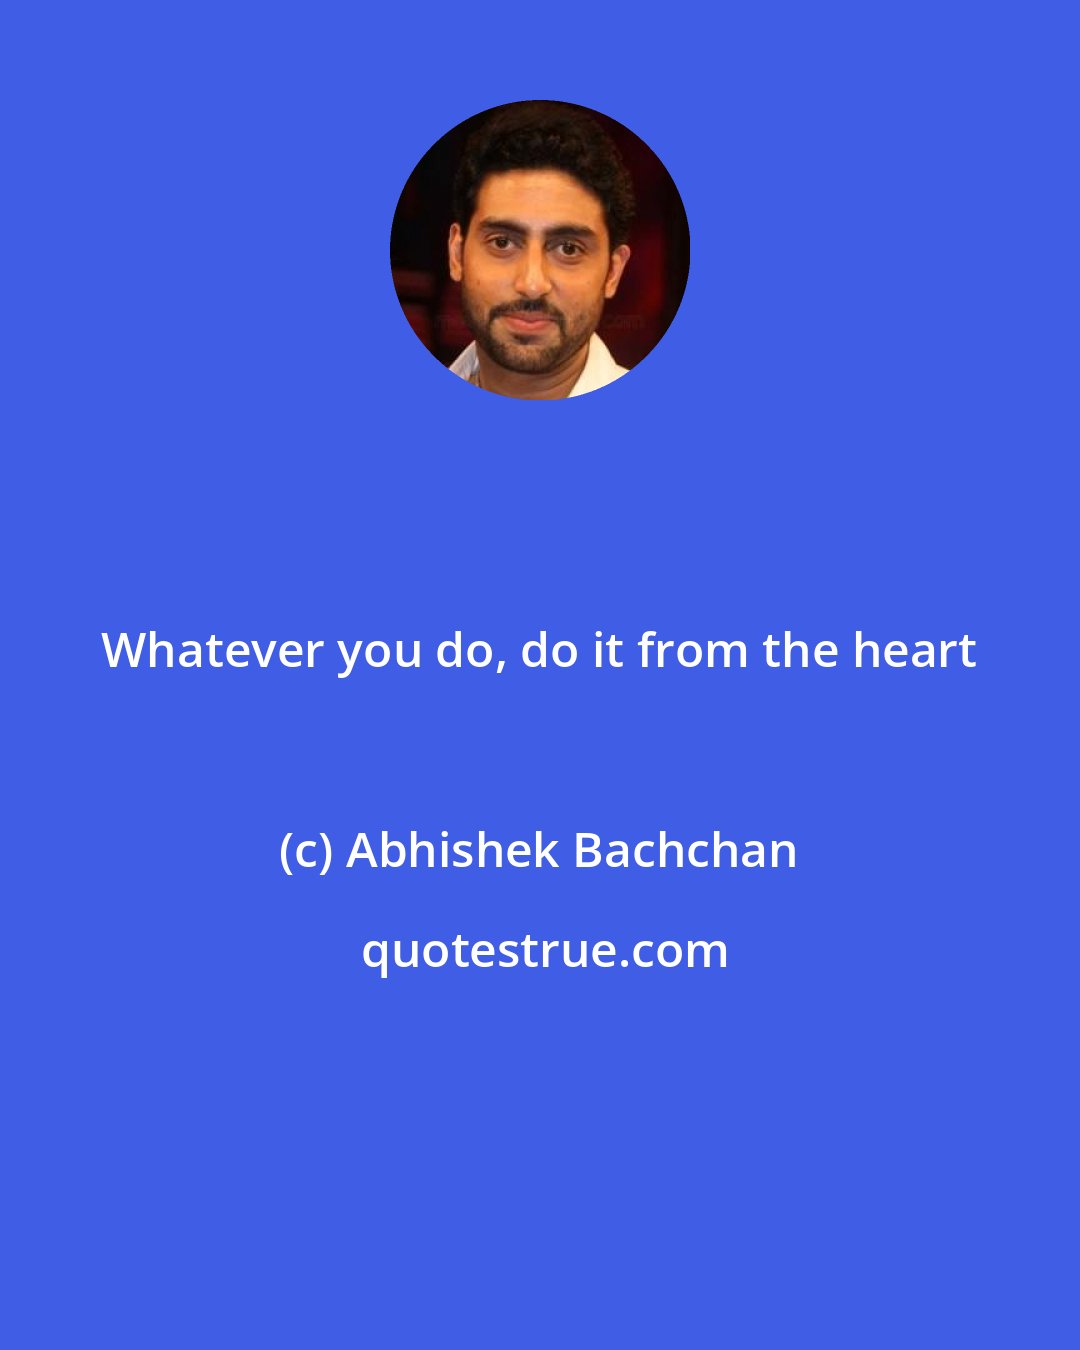 Abhishek Bachchan: Whatever you do, do it from the heart